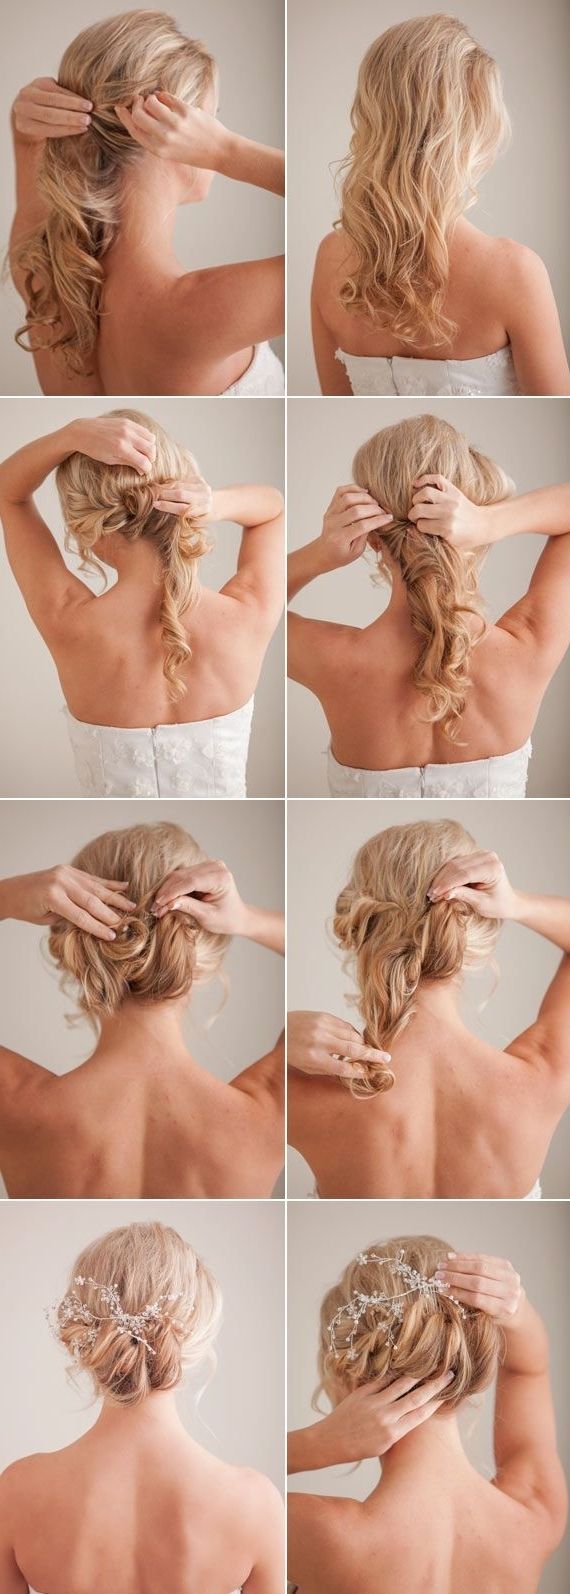 115 Best Easy Hairstyles For Long Hair Images On Pinterest Pertaining To Easy Diy Updos For Long Hair (View 11 of 15)